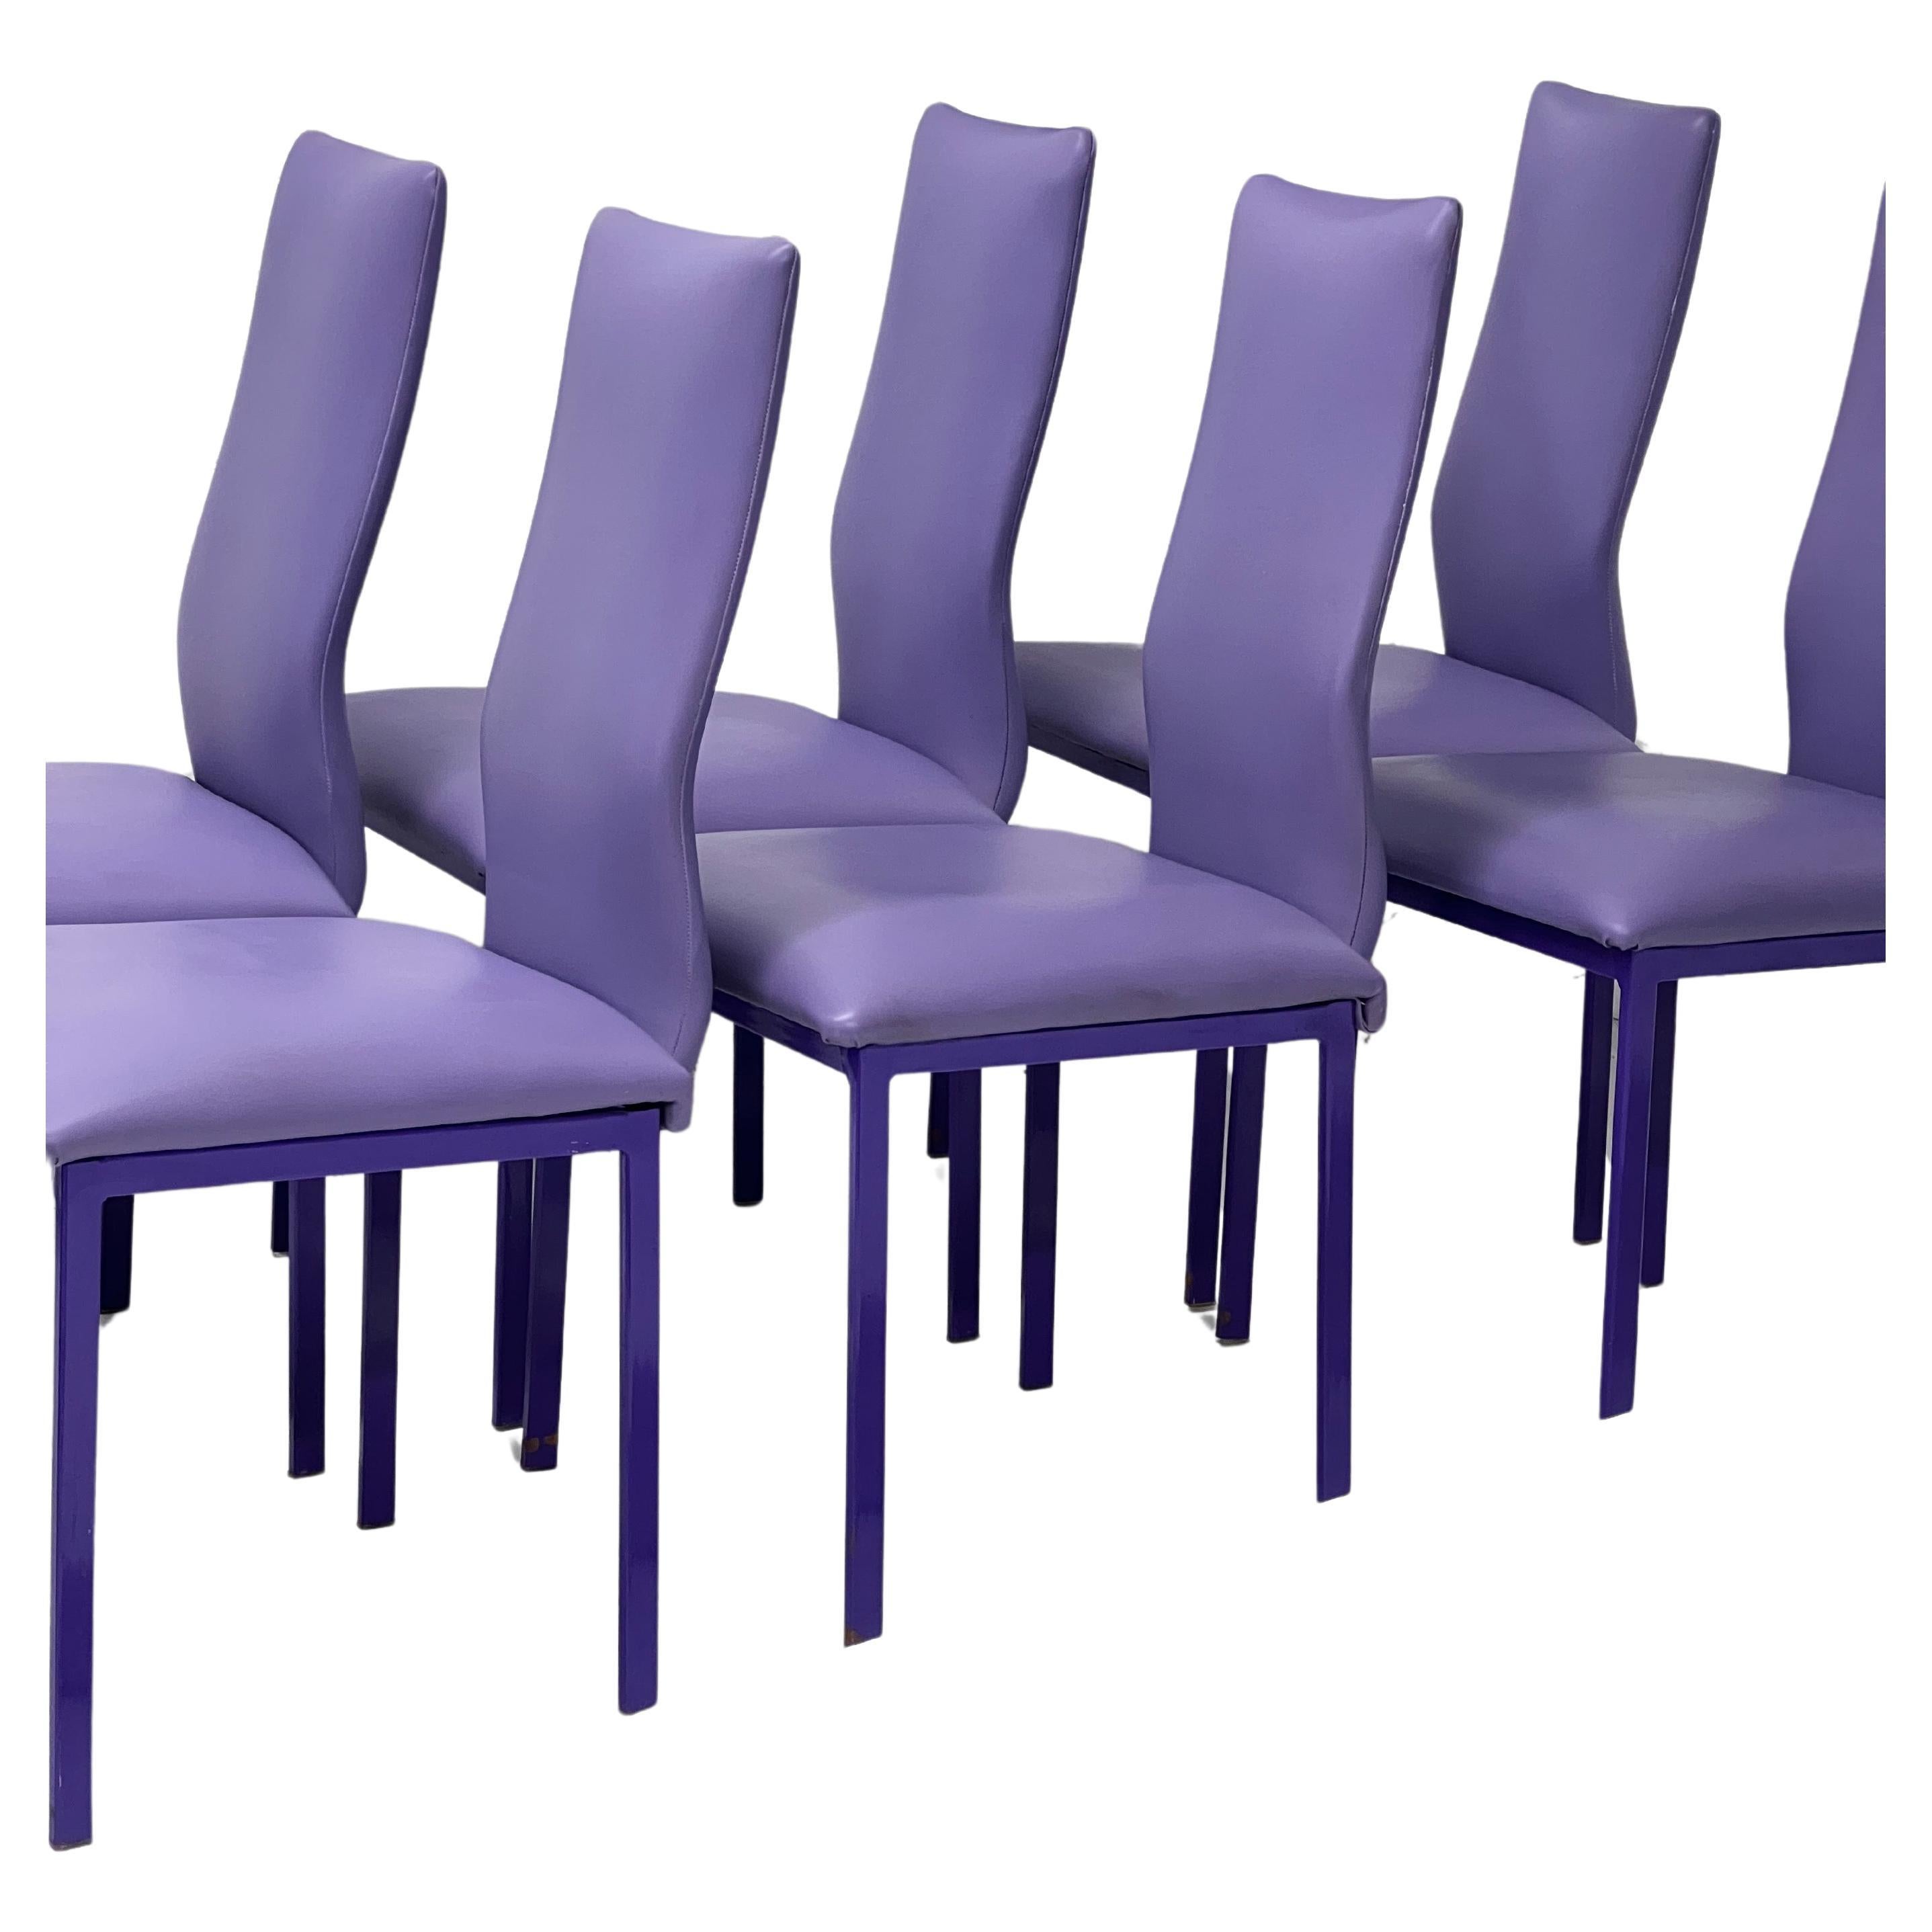 Minson Corp. Postmodern Sculptural Lavender Purple Chairs - Set of 6 For Sale